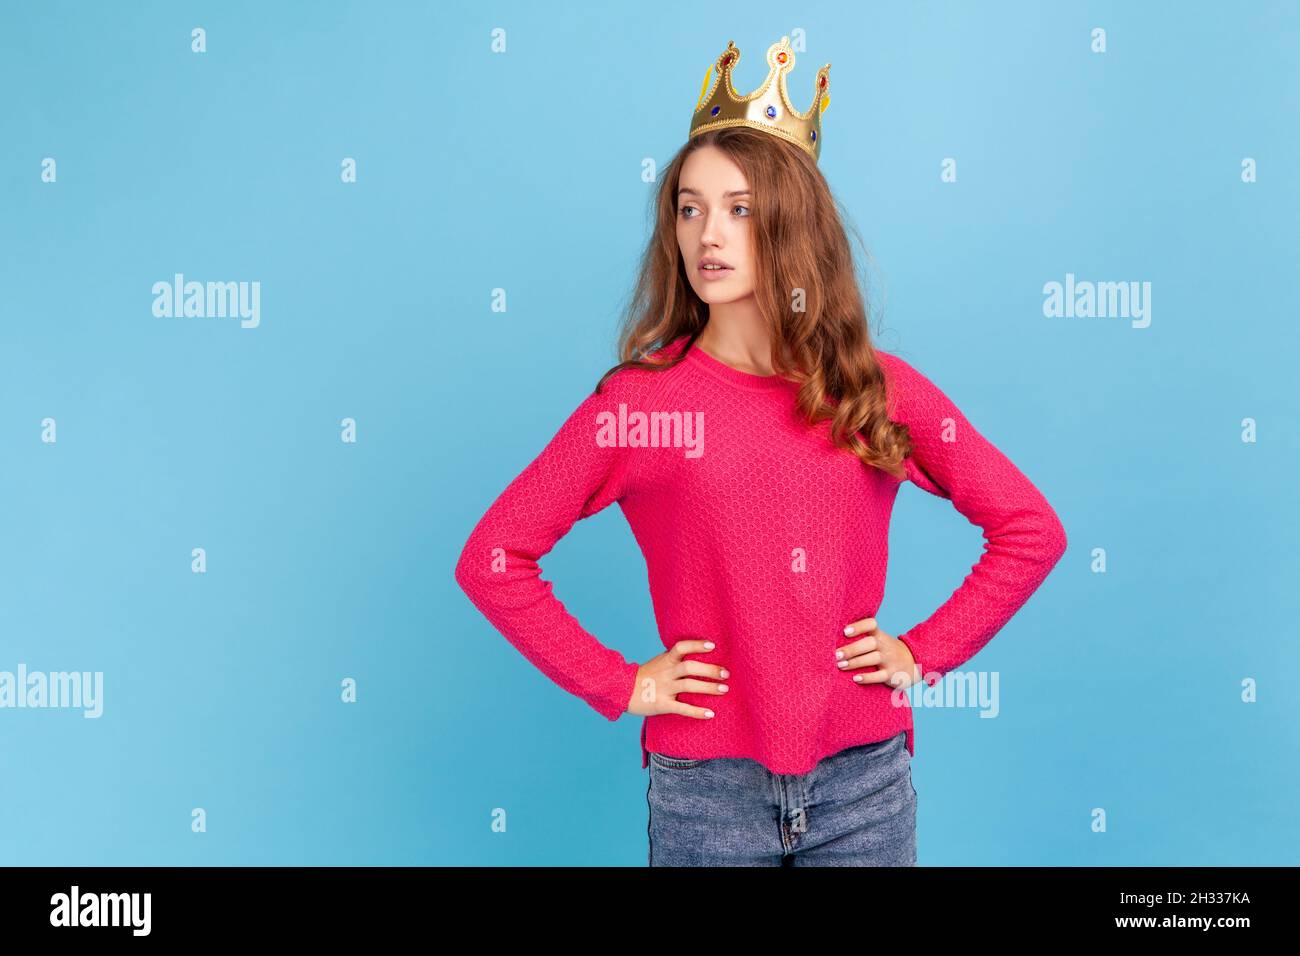 Arrogant woman wearing pink pullover, in crown on head looking away with confident expression, self-motivation and dreams to be best. Indoor studio shot isolated on blue background. Stock Photo